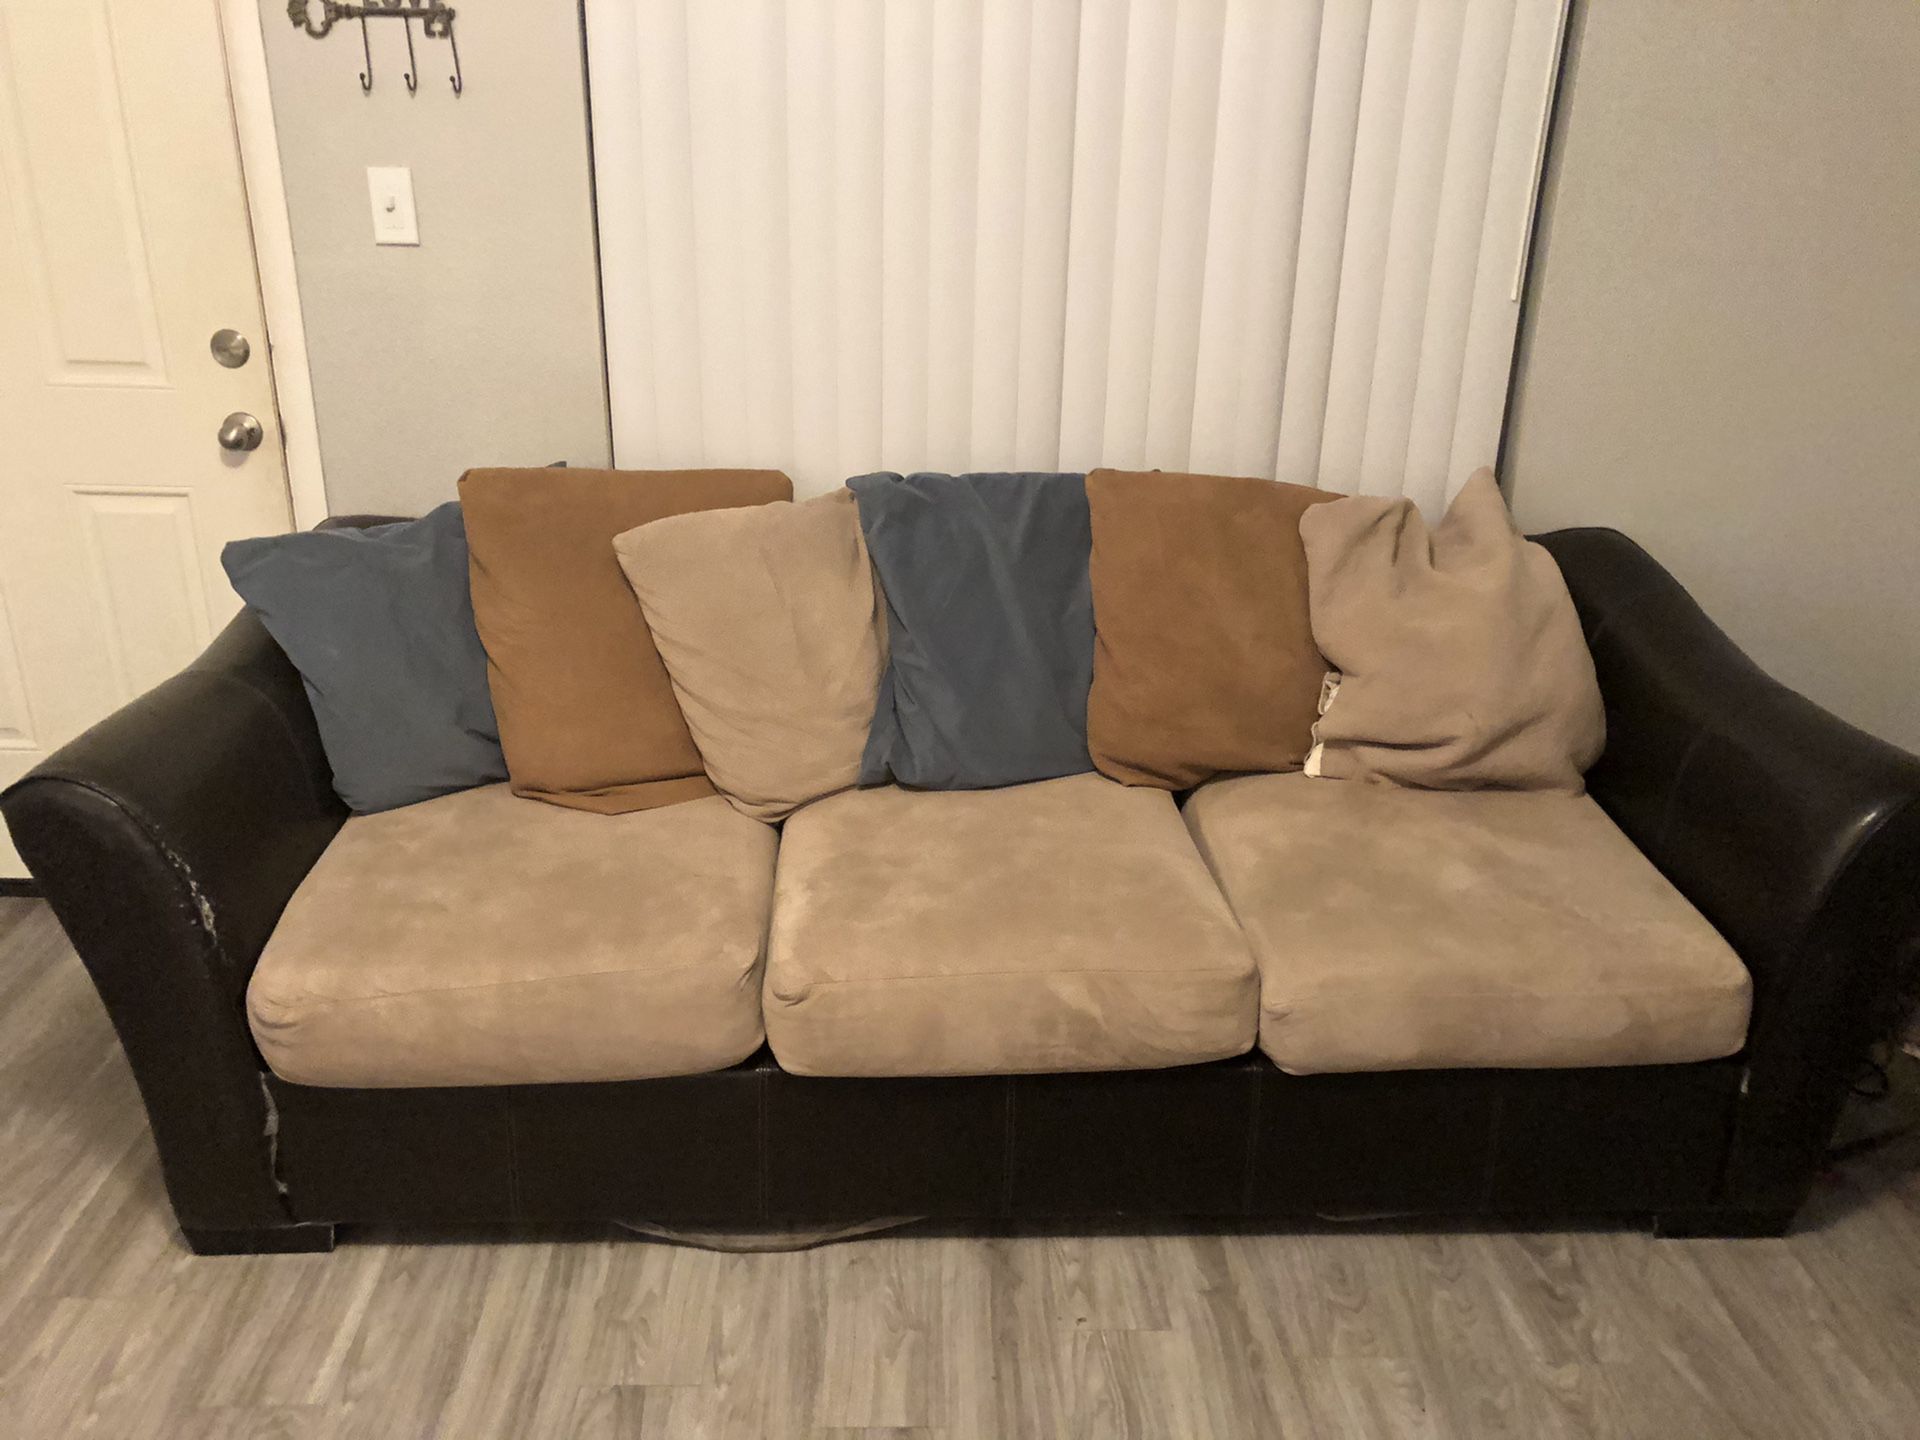 Couch, love seat and ottoman set